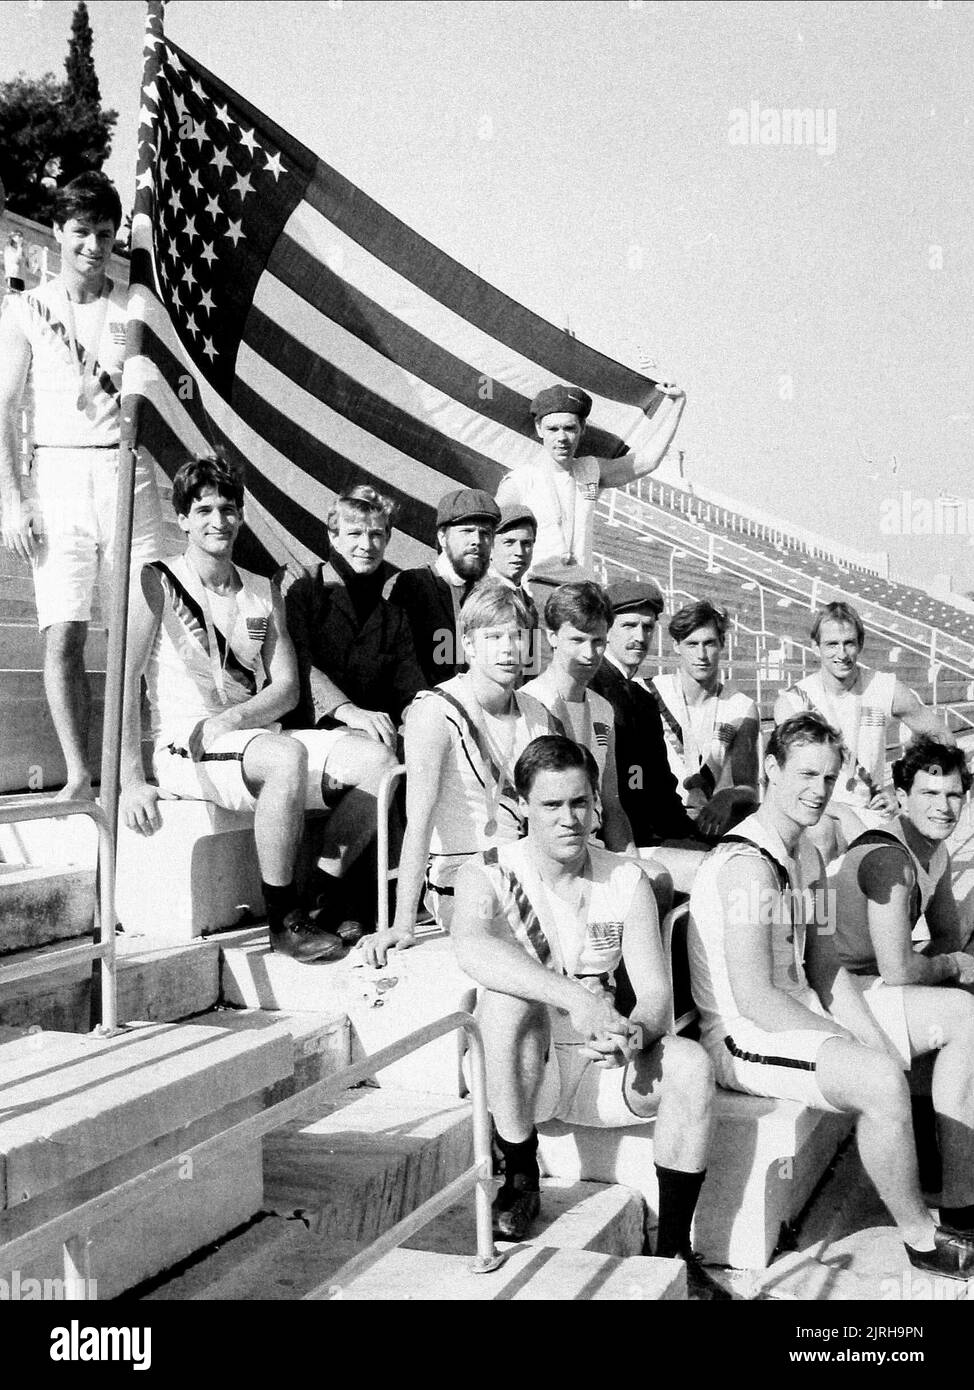 MORTON,FREWER,SWARTZ,CONNERY,COBB,WILEY,BLOCK,ARMSTRONG,EDWARDS,GILLIAM,MERRILL,CONDER,HYDE-WHITE,CARUSO, THE FIRST OLYMPICS: ATHENS 1896, 1984 Stock Photo